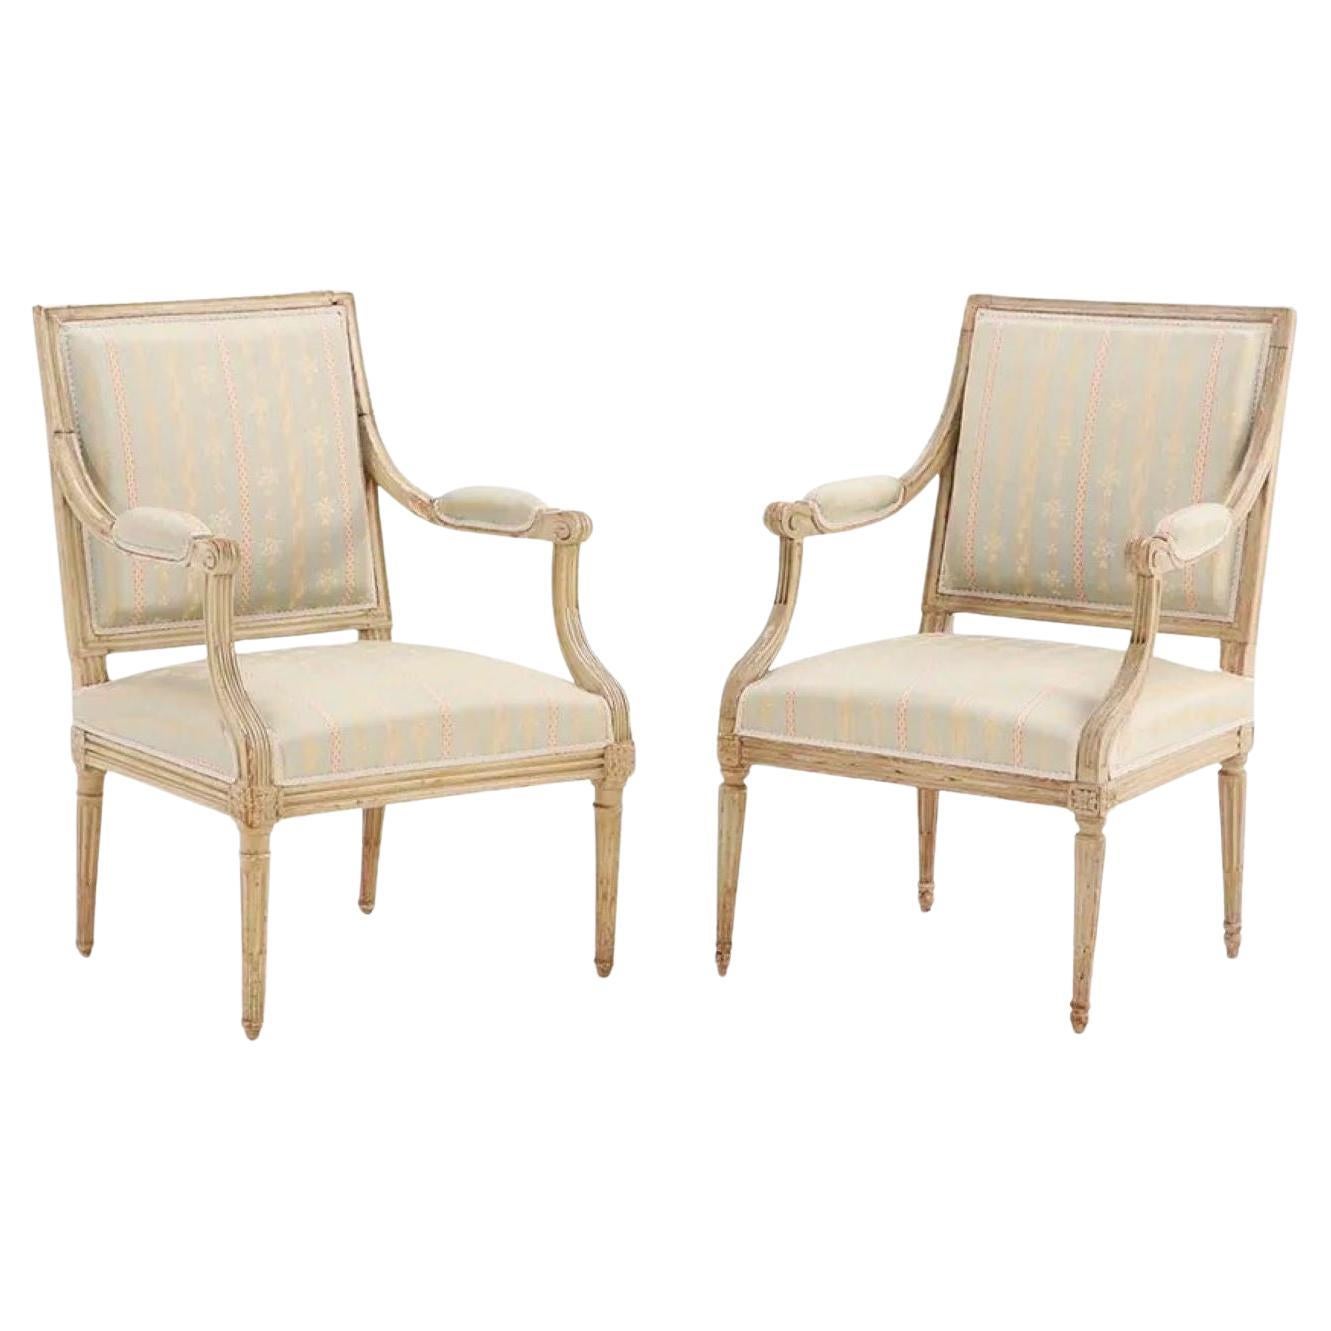 Matched Pair of Louis XVI Armchairs, 18th C., Signed AP Dupain For Sale